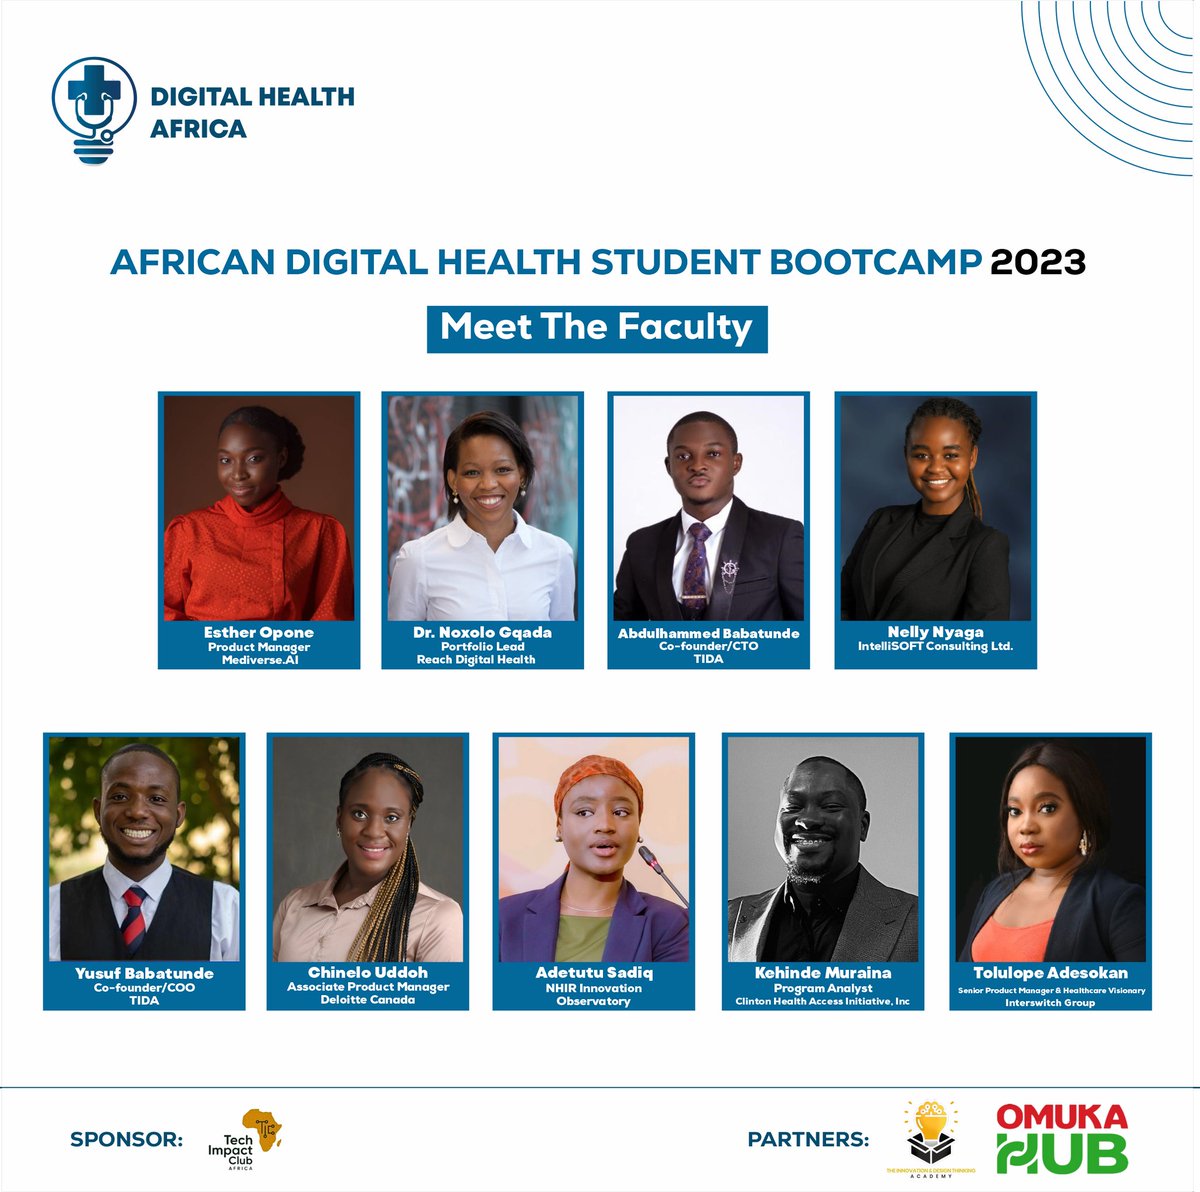 Meet our distinguished faculty 🔥

We are excited to have industry experts and professionals in the digital health field in Africa. 

They will guide and mentor our participants during the Community Health Innovation Challenge ⚡

#adhsb2023
#youthparticipation
#digitalhealth